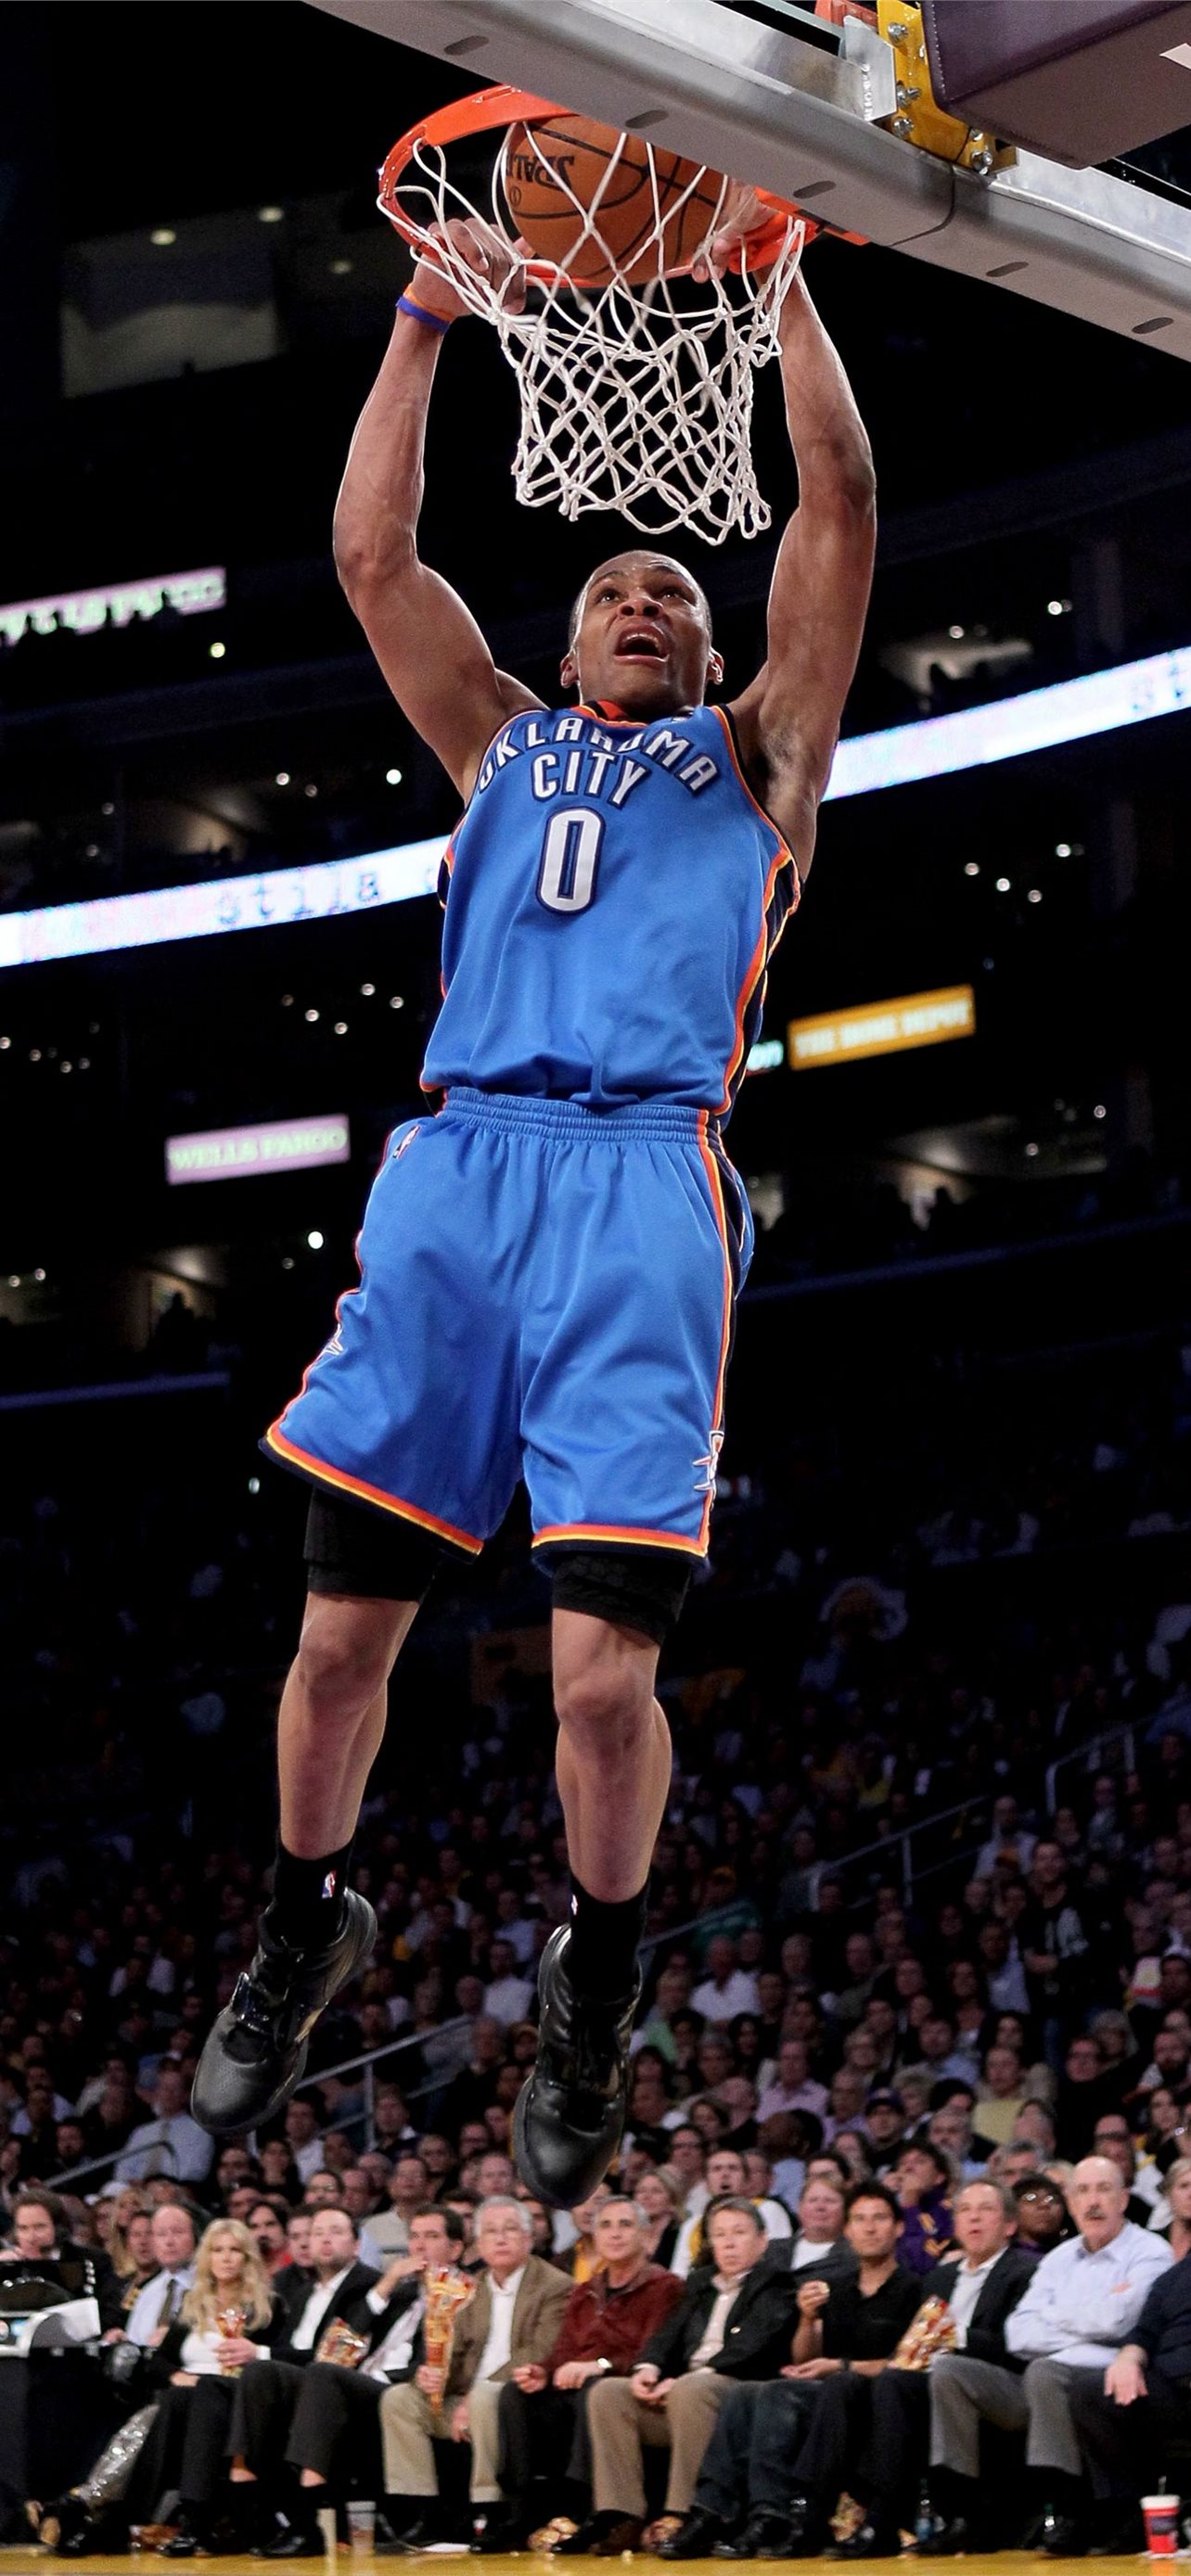 Imacc Sports  Russell Westbrook Wallpaper Download now  Johny Silva   Facebook